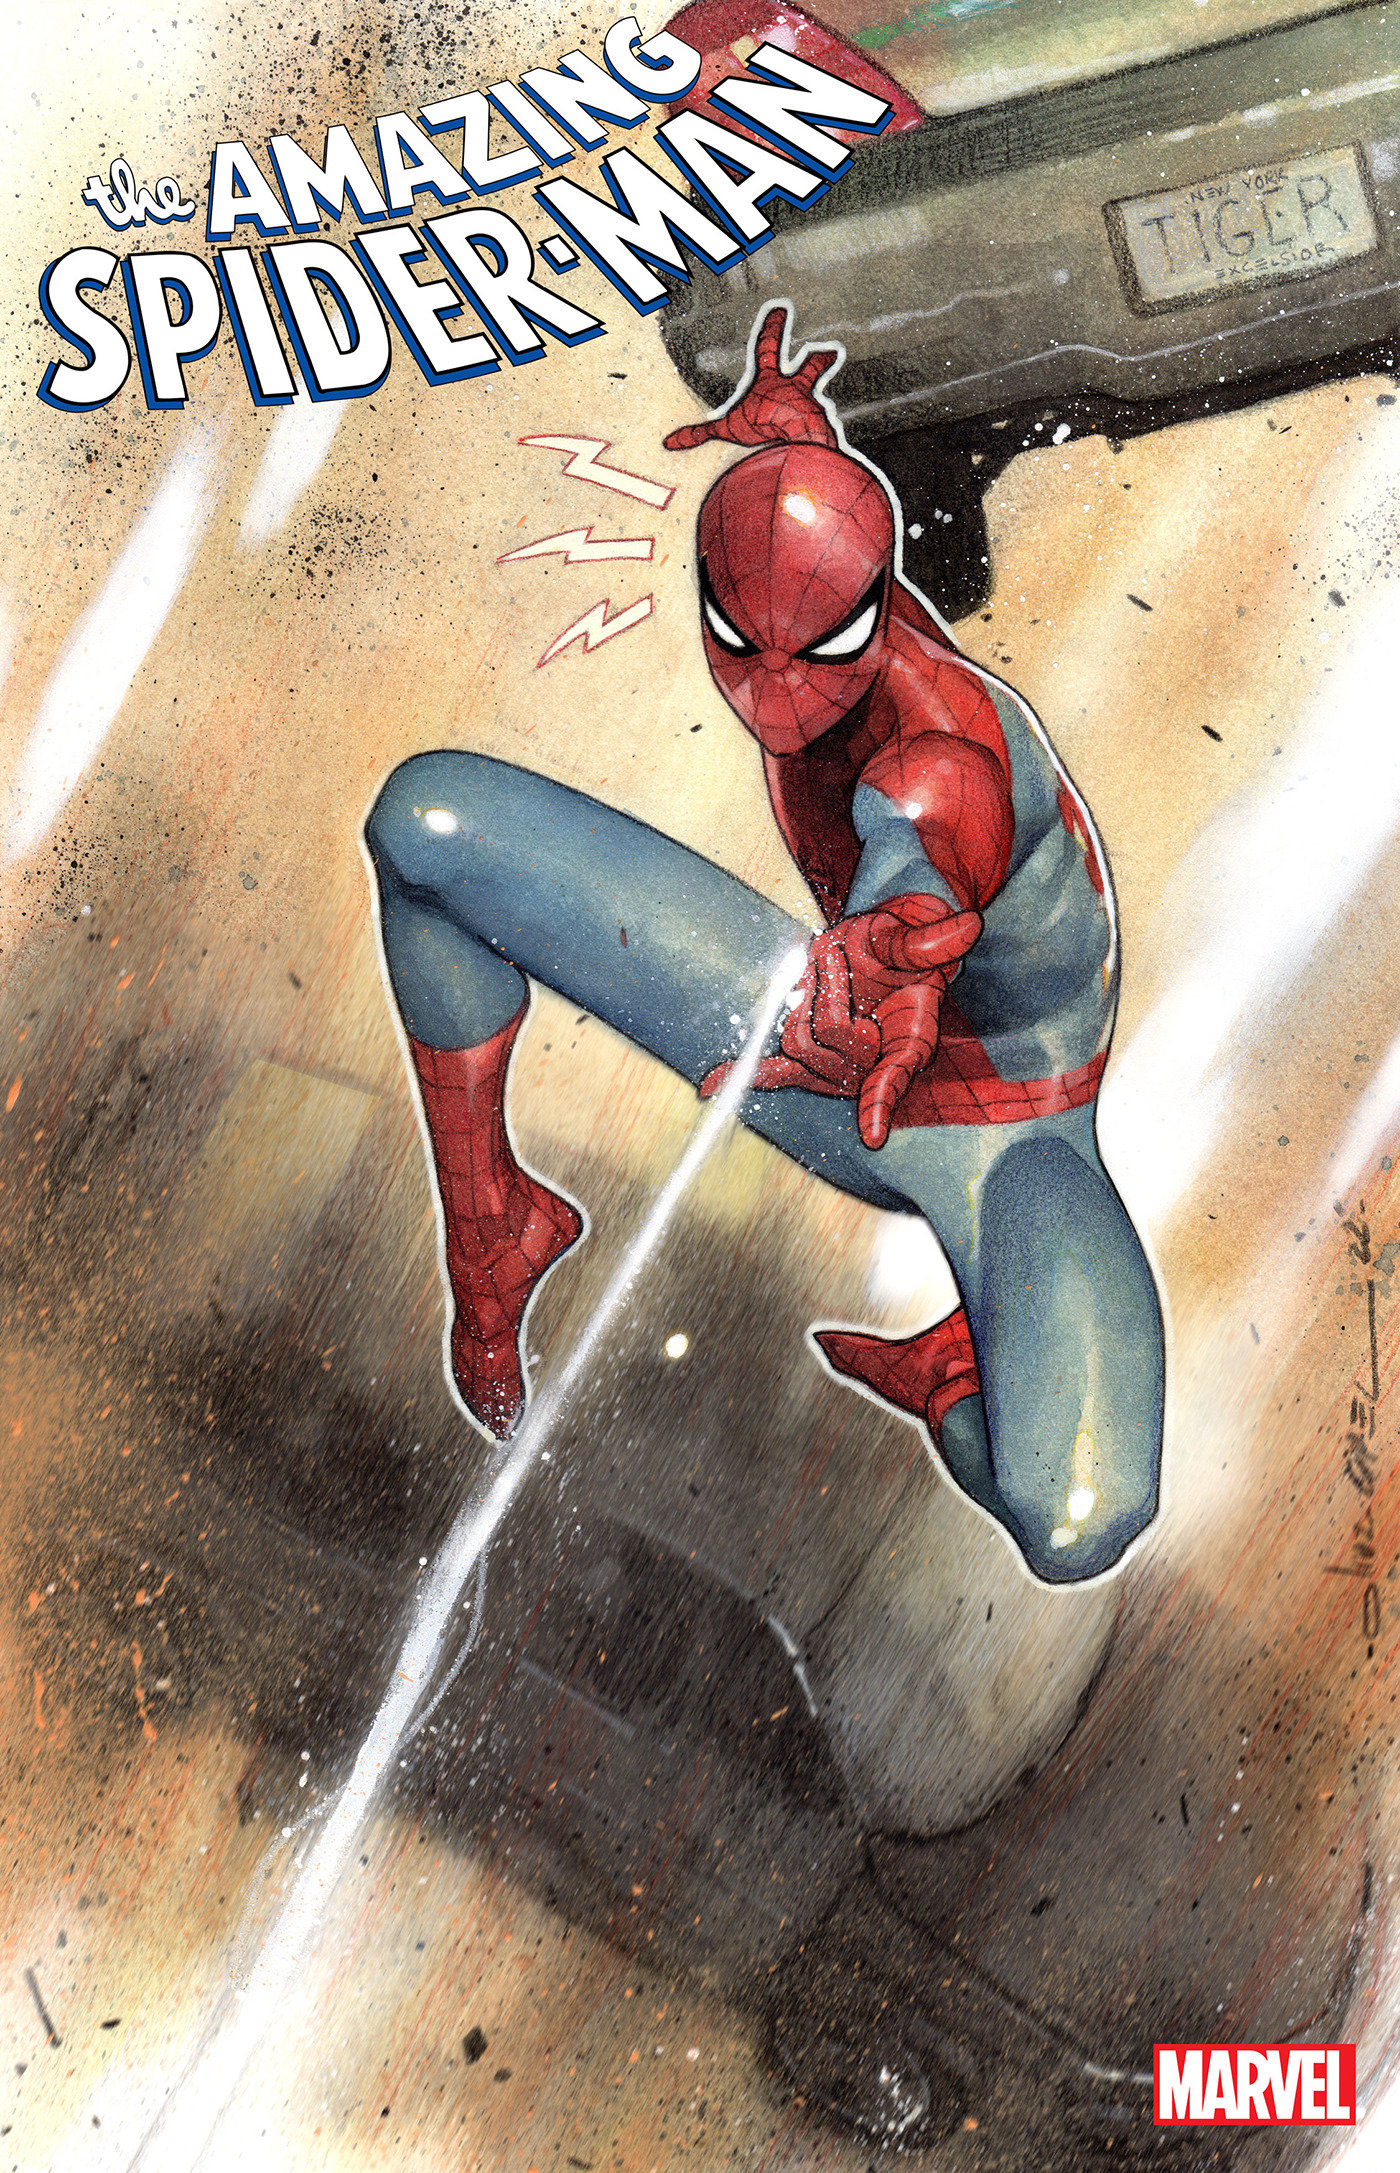 Amazing Spider-Man #26 1 for 200 Incentive Olivier Coipel Variant (2022)